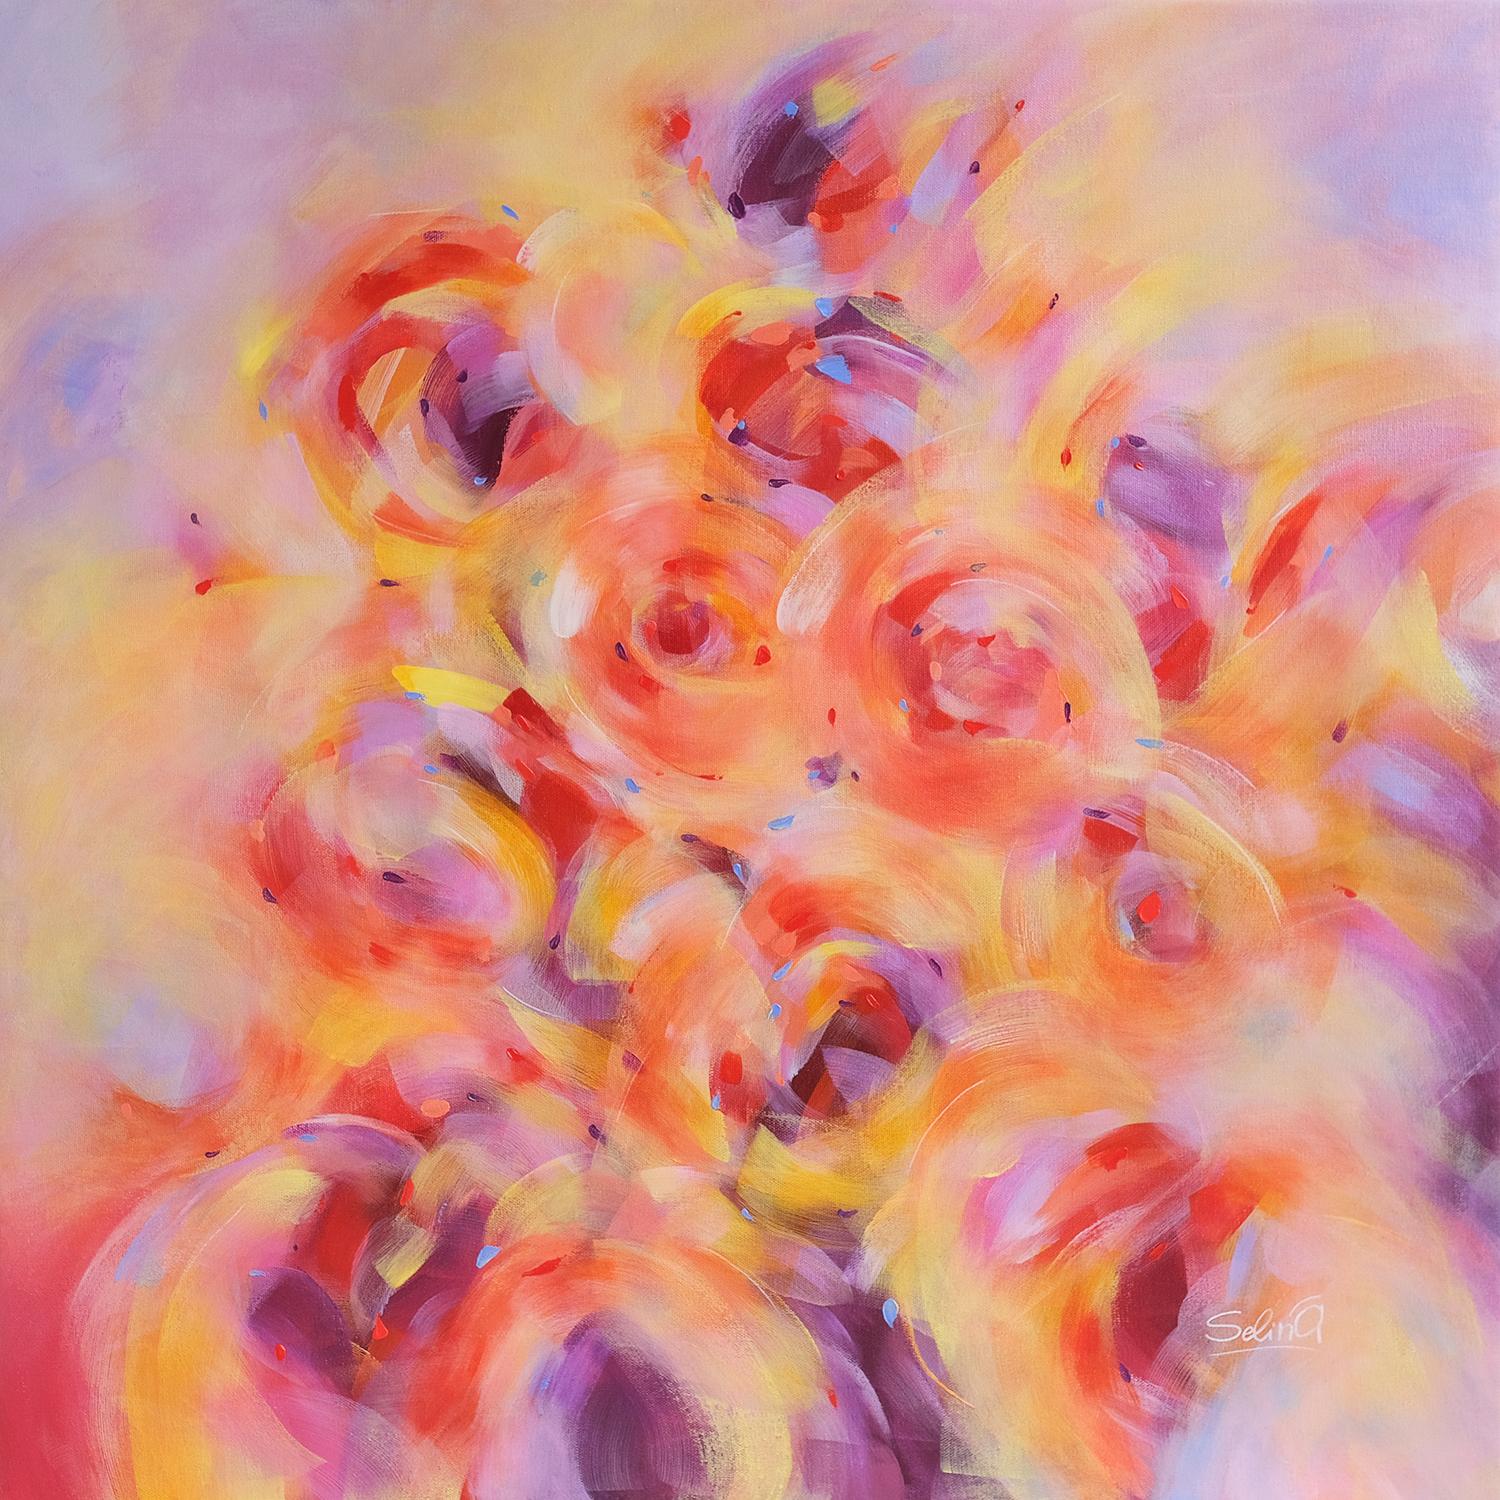 This painting is very soft and tender, gentle,like enveloping energy  giving connection with nature, with your inner world, awaking our inner light. Colors here are calming, natural and well balanced. It's very warming and cozy. 
Bright colors bring